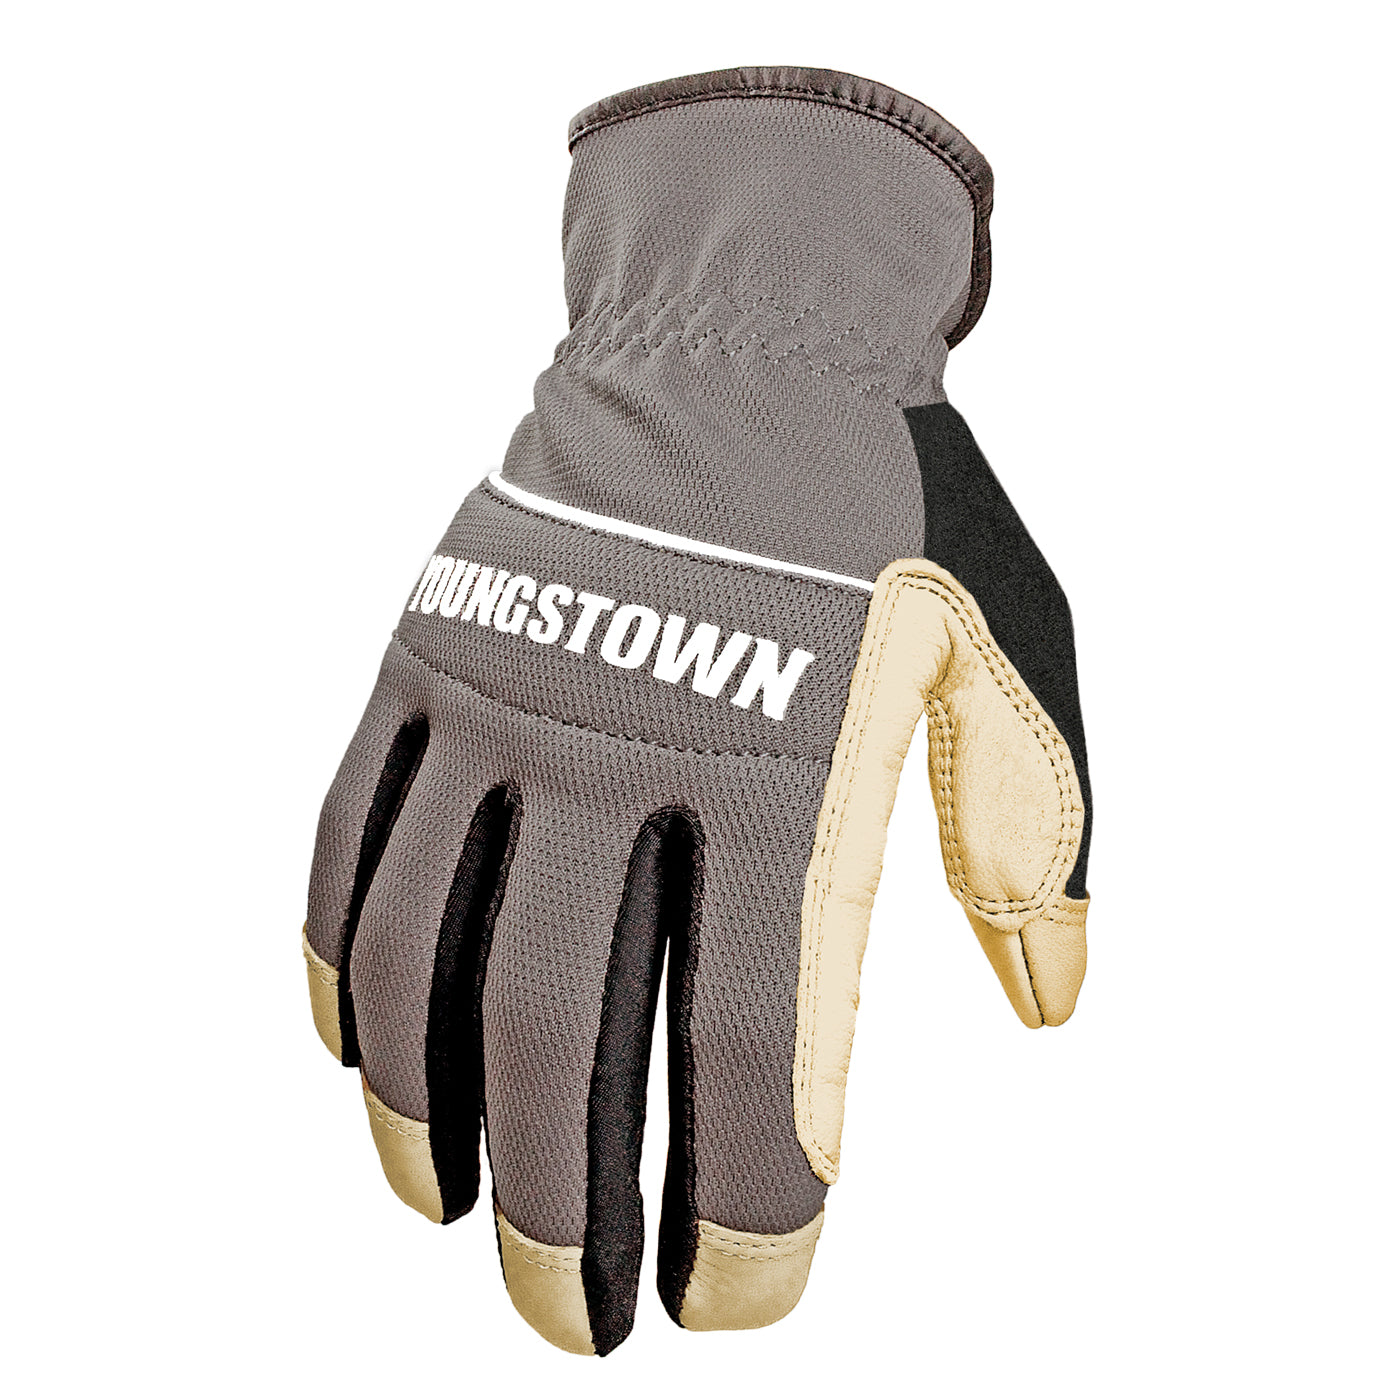 Youngstown Yellow T-Shirt - Youngstown Glove